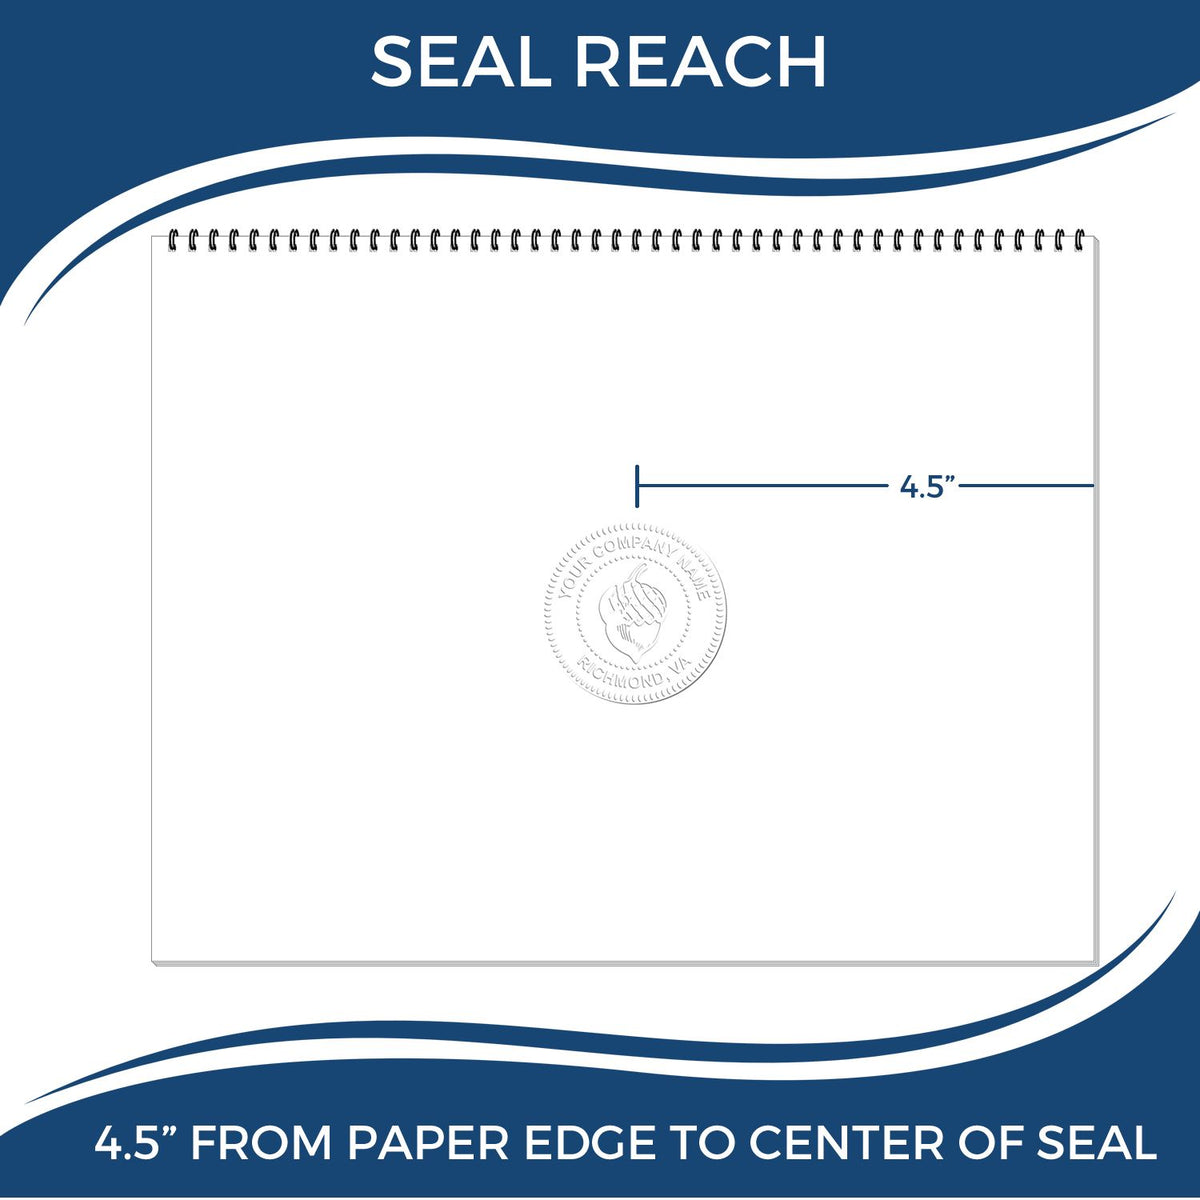 An infographic showing the seal reach which is represented by a ruler and a miniature seal image of the Extended Long Reach Wyoming Architect Seal Embosser